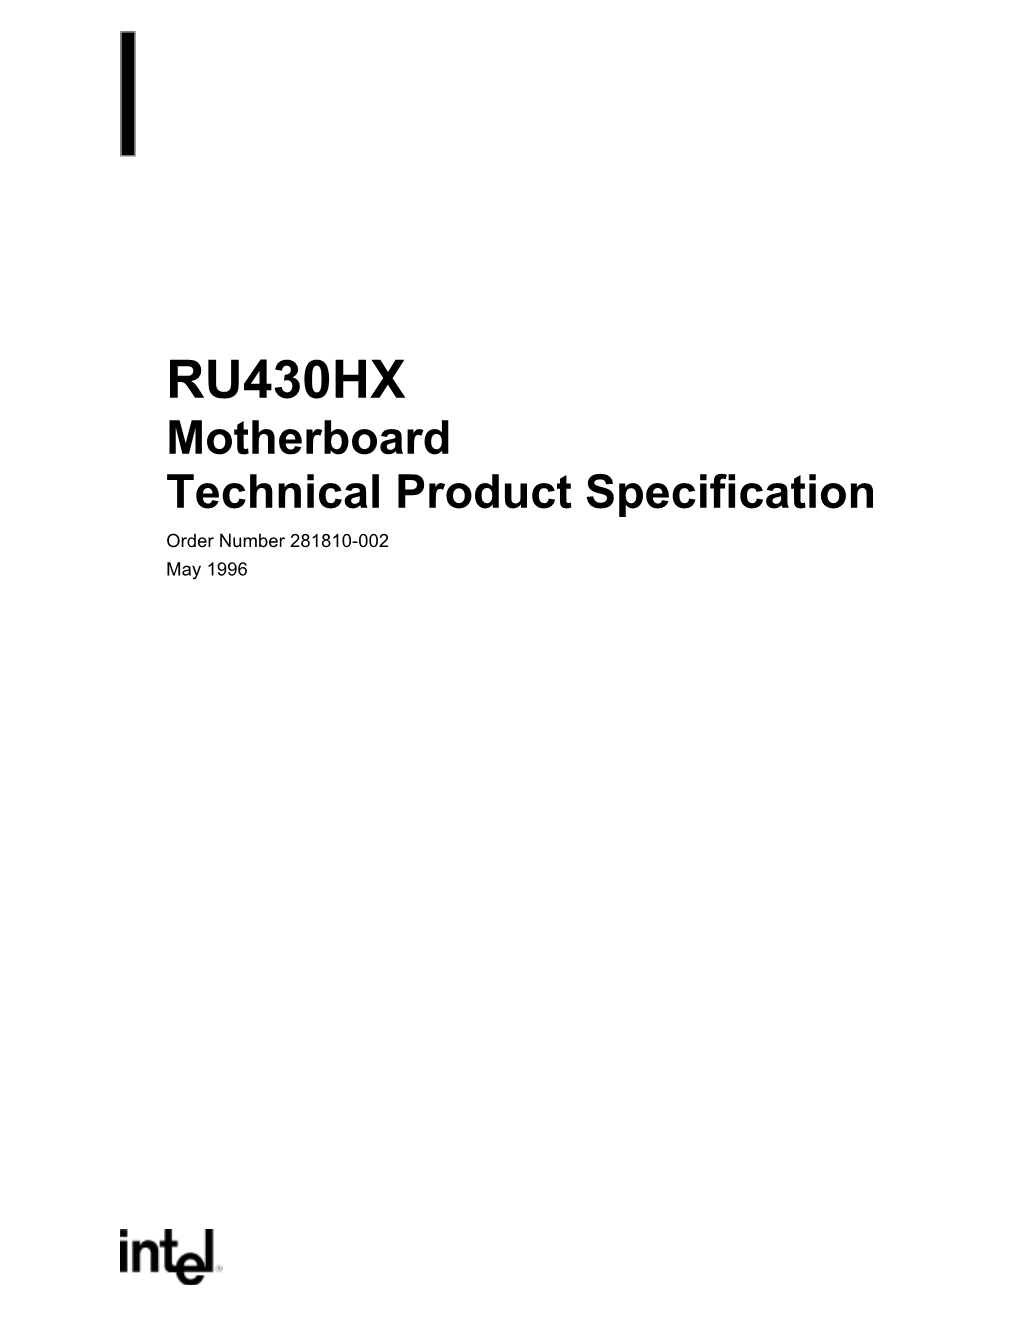 RU430HX LPX Motherboard Technical Product Specification